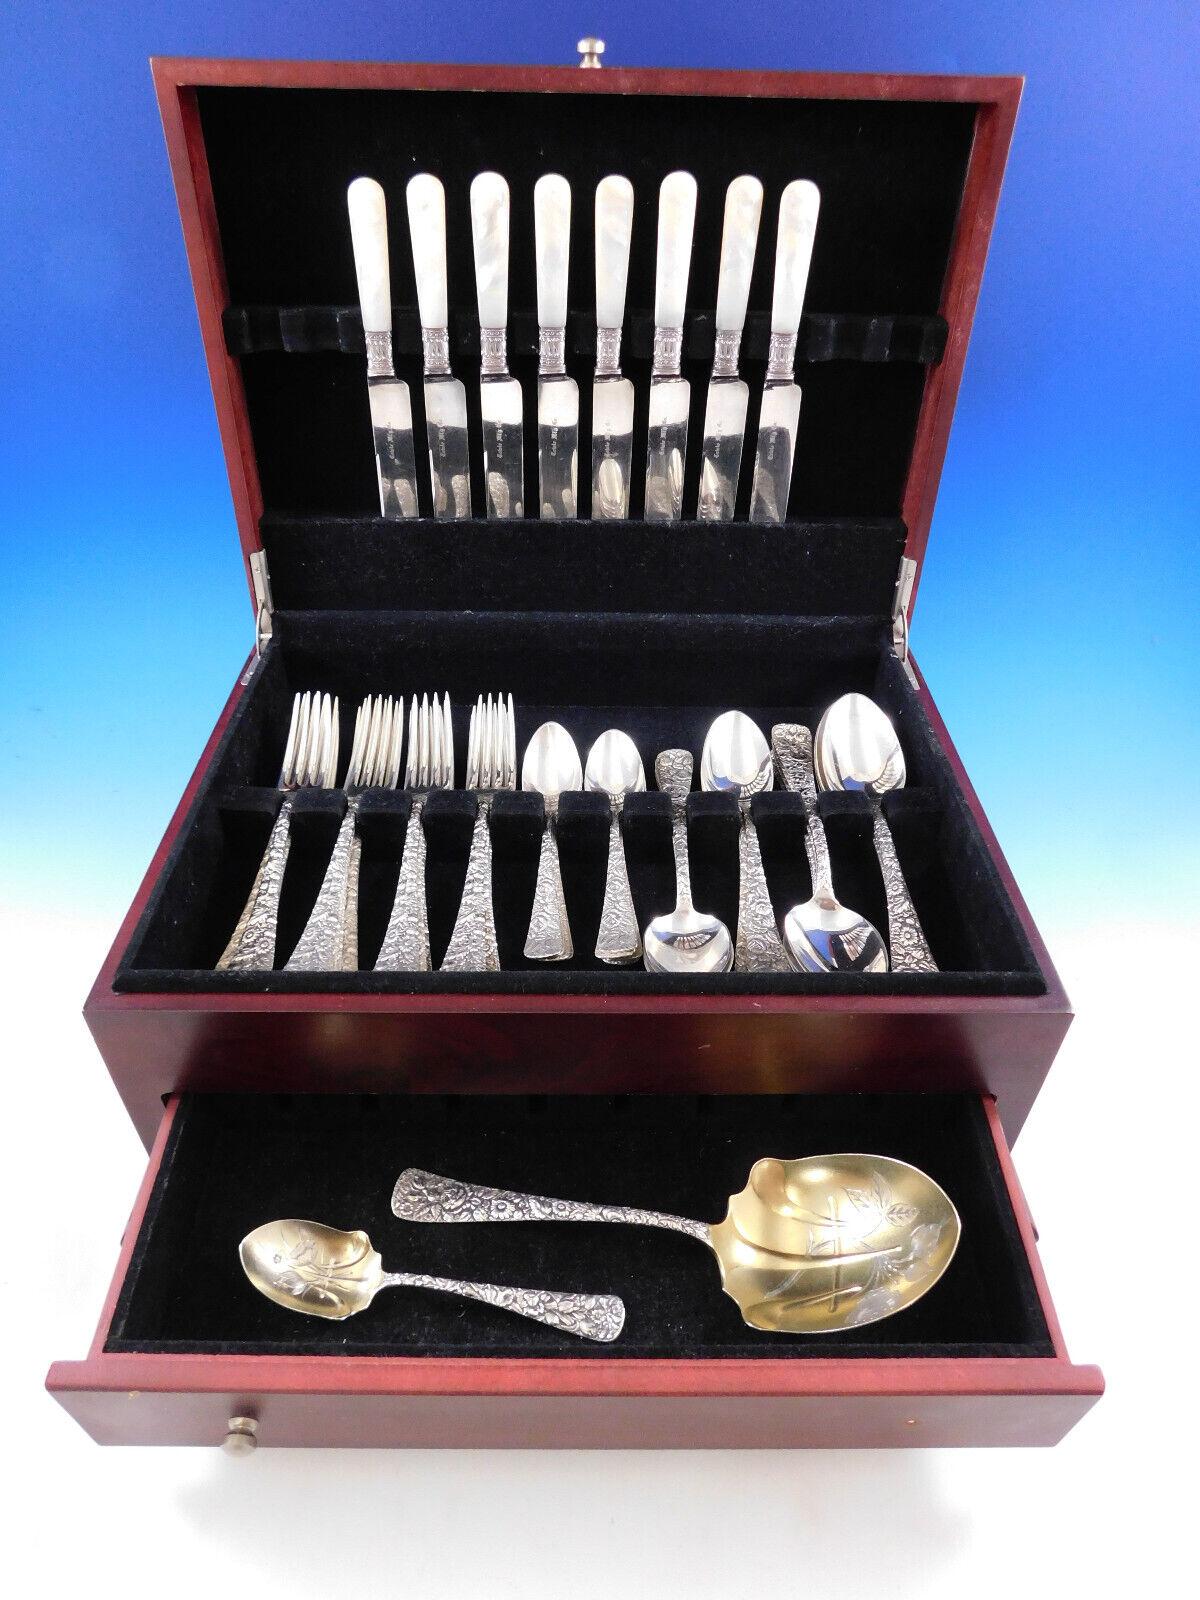 Rare multi-motif floral Arlington by Towle c1884 sterling silver Flatware set - 50 Pieces (including 8 Mother of Pearl handle knives). This set includes:

8 Mother of Pearl handle Knives, 8 5/8